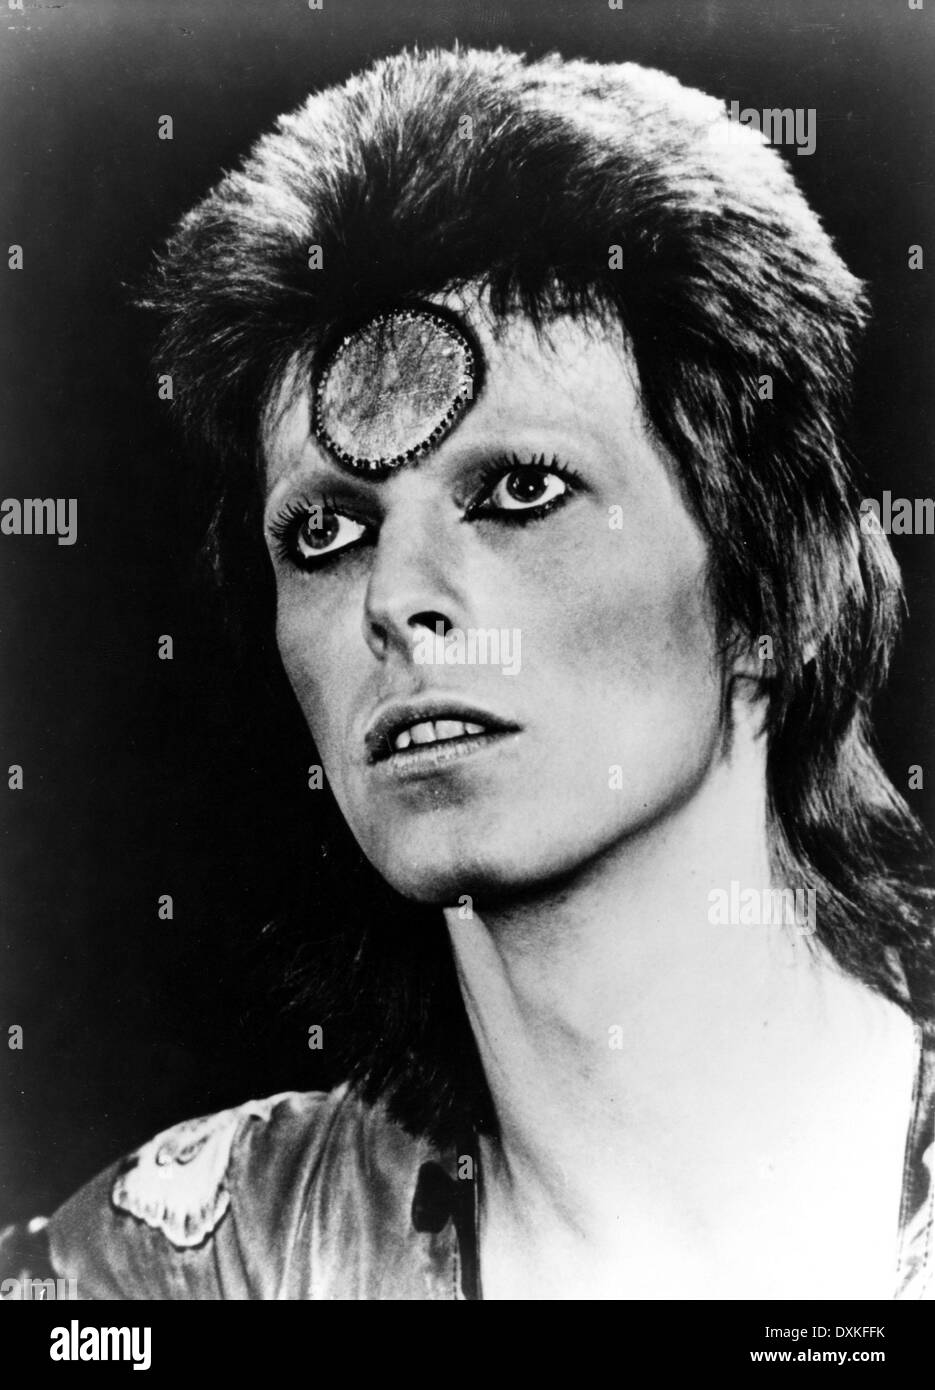 Ziggy Stardust et the Spiders from Mars (1973) David Bowie Banque D'Images